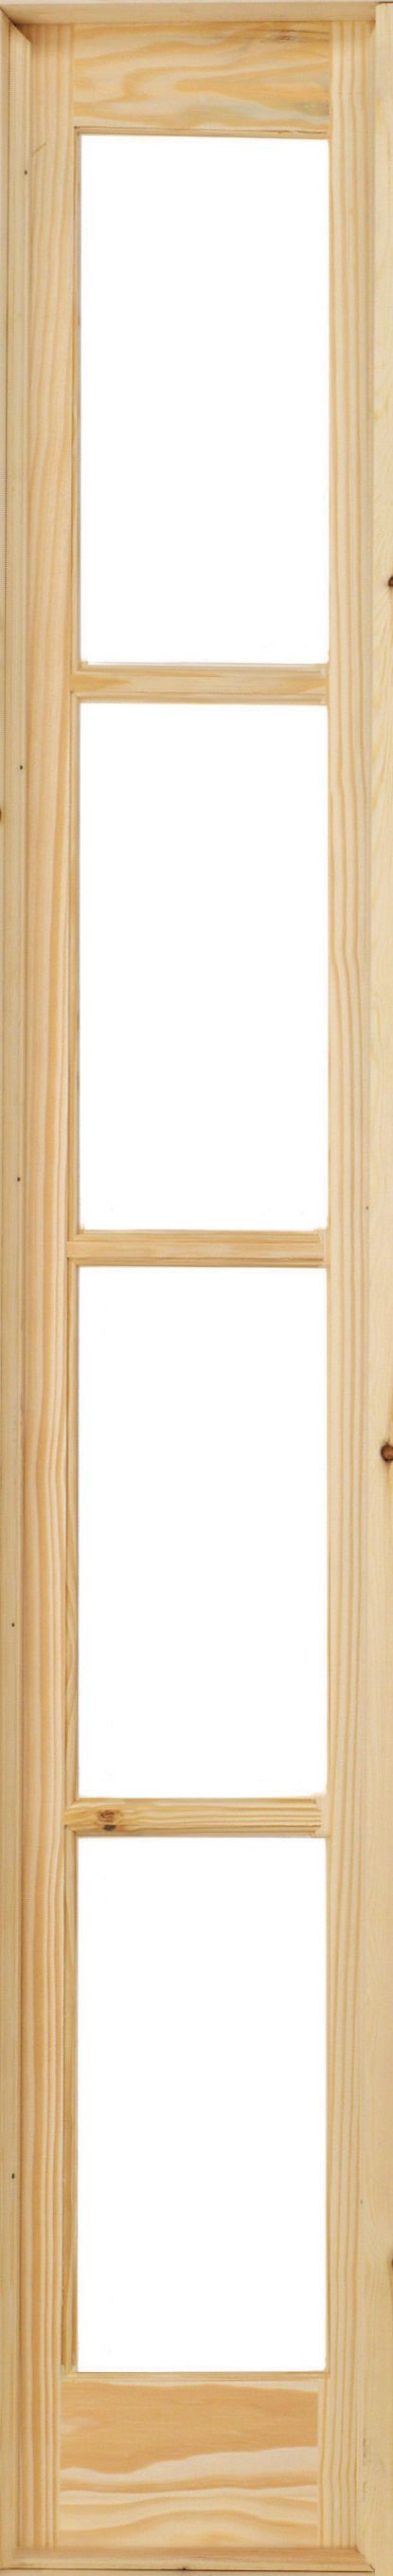 Image of Wickes Newland Fully Glazed Clear Pine 4 Lite Demi Panel Internal French Door - 1981 x 292mm